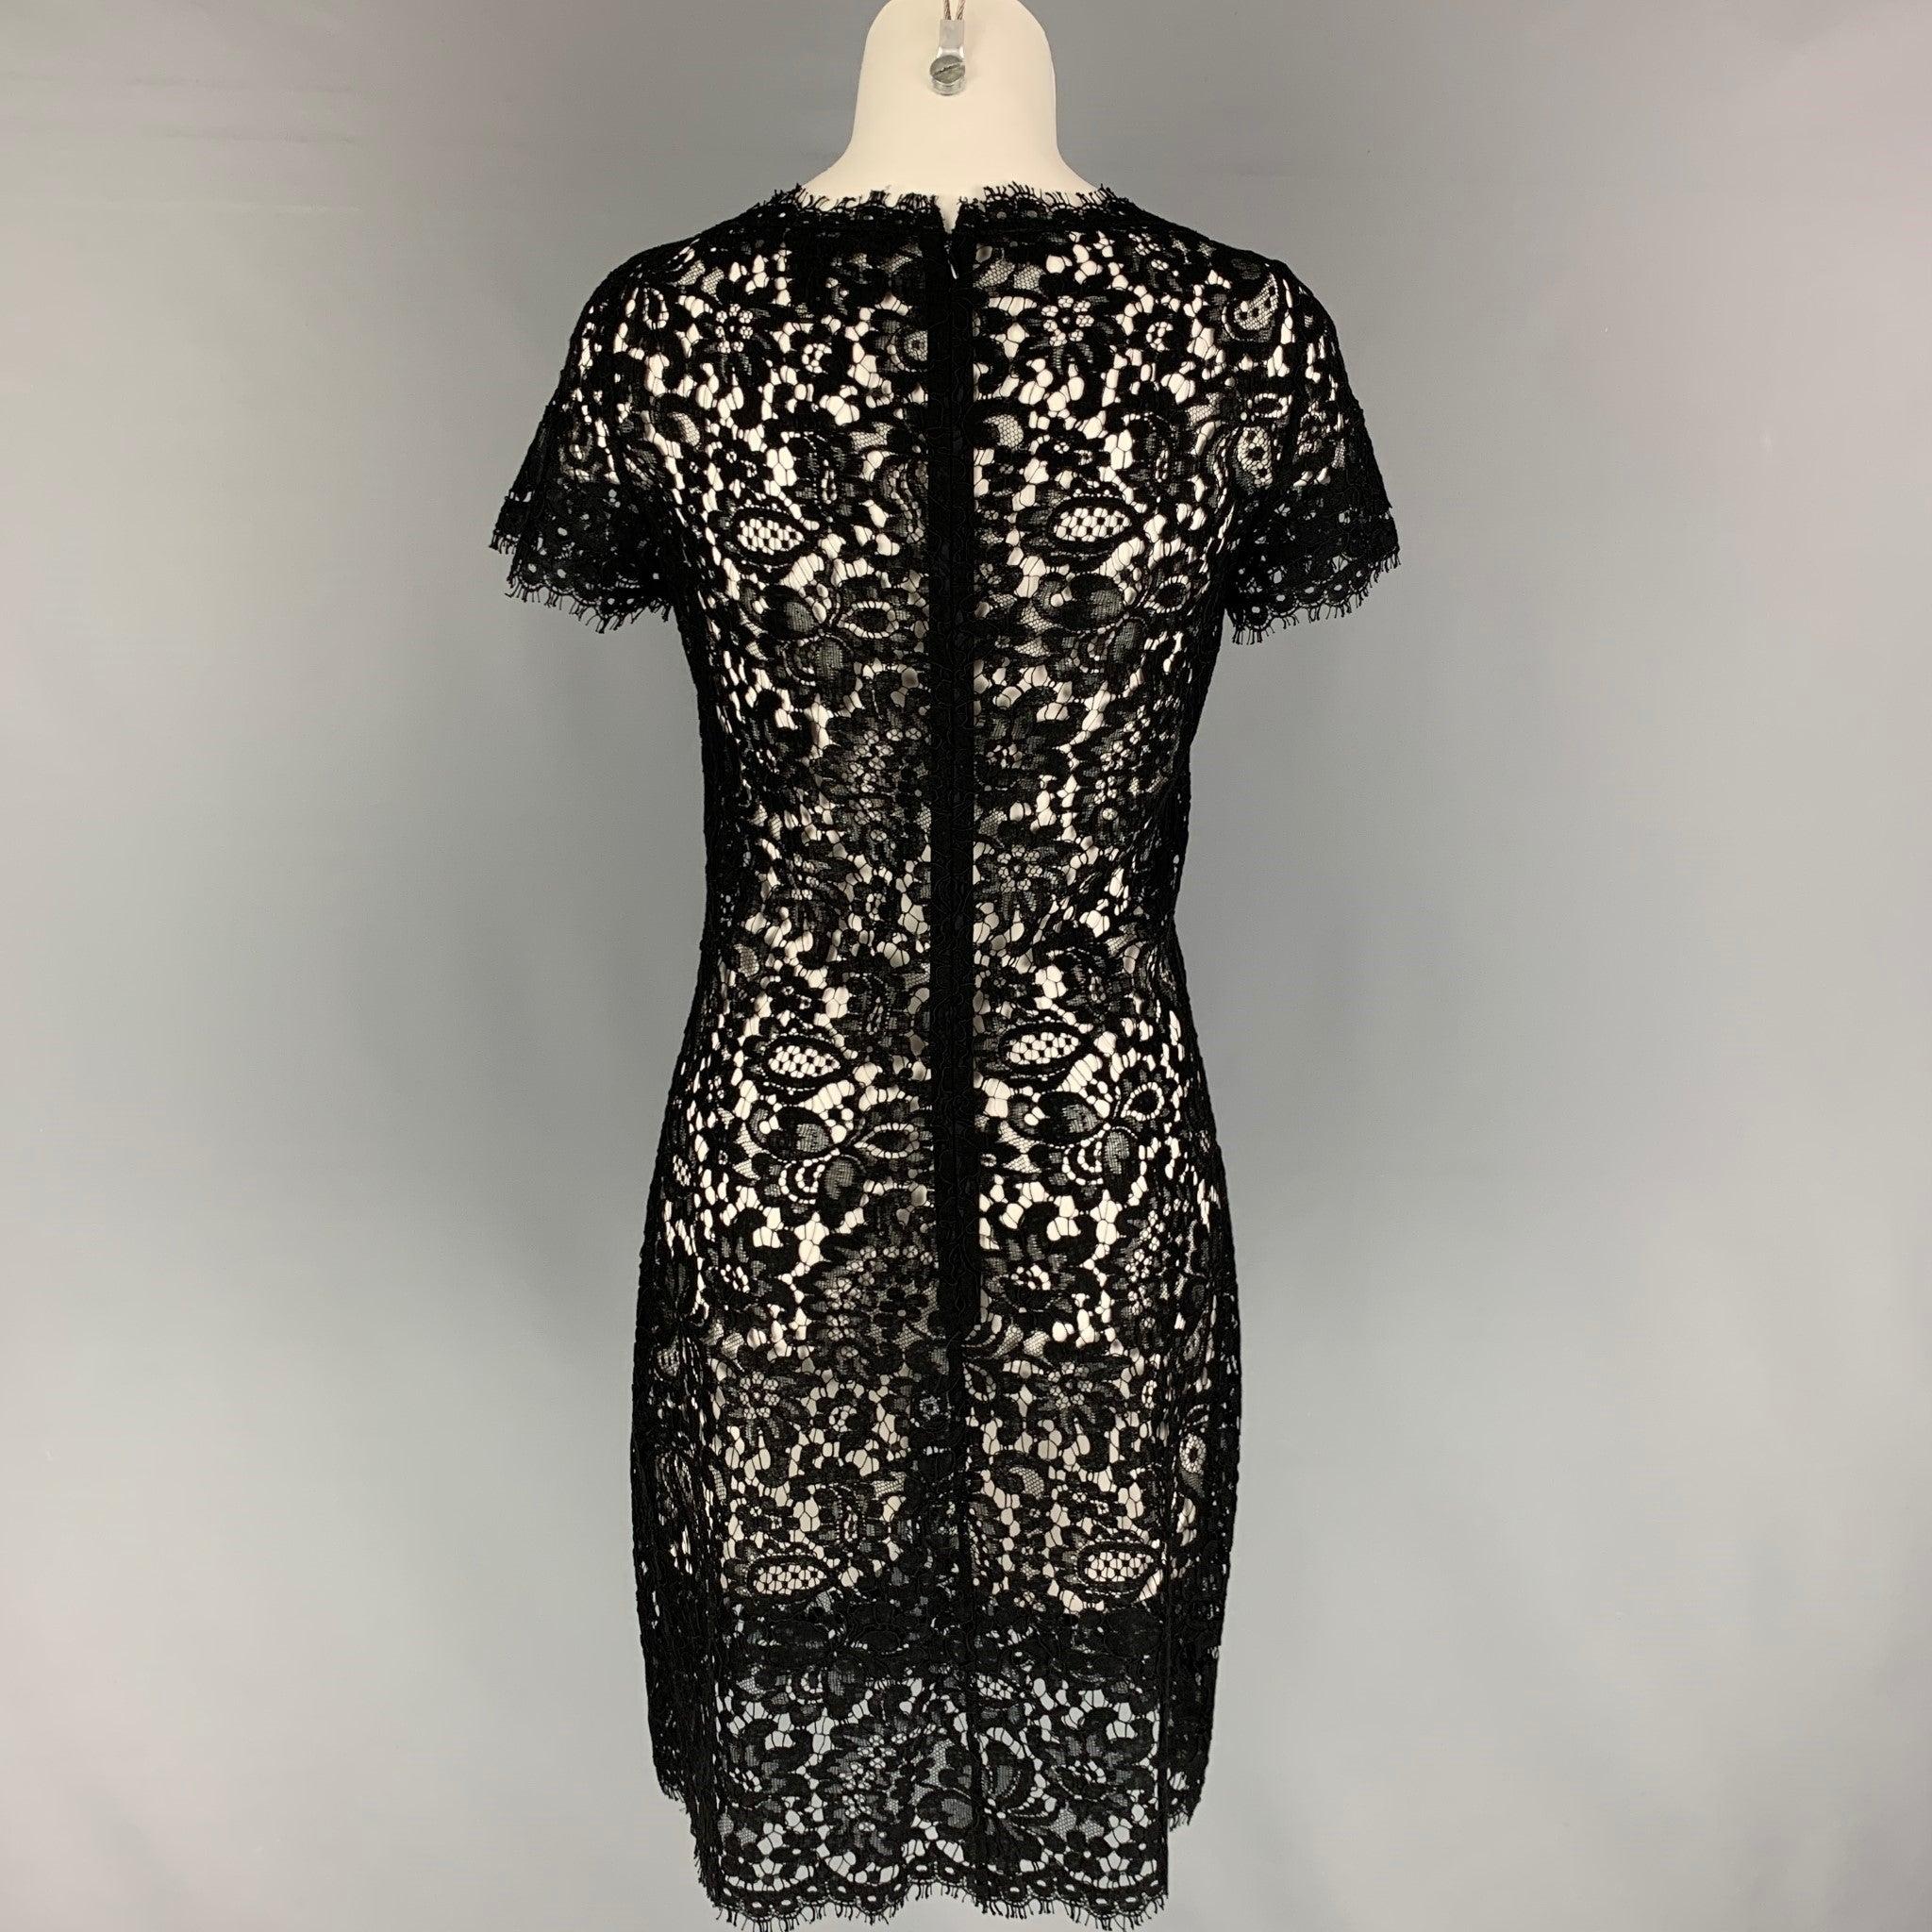 RALPH LAUREN Black Label Size 10 Cotton Blend See Through Short Sleeve Dress In Good Condition For Sale In San Francisco, CA